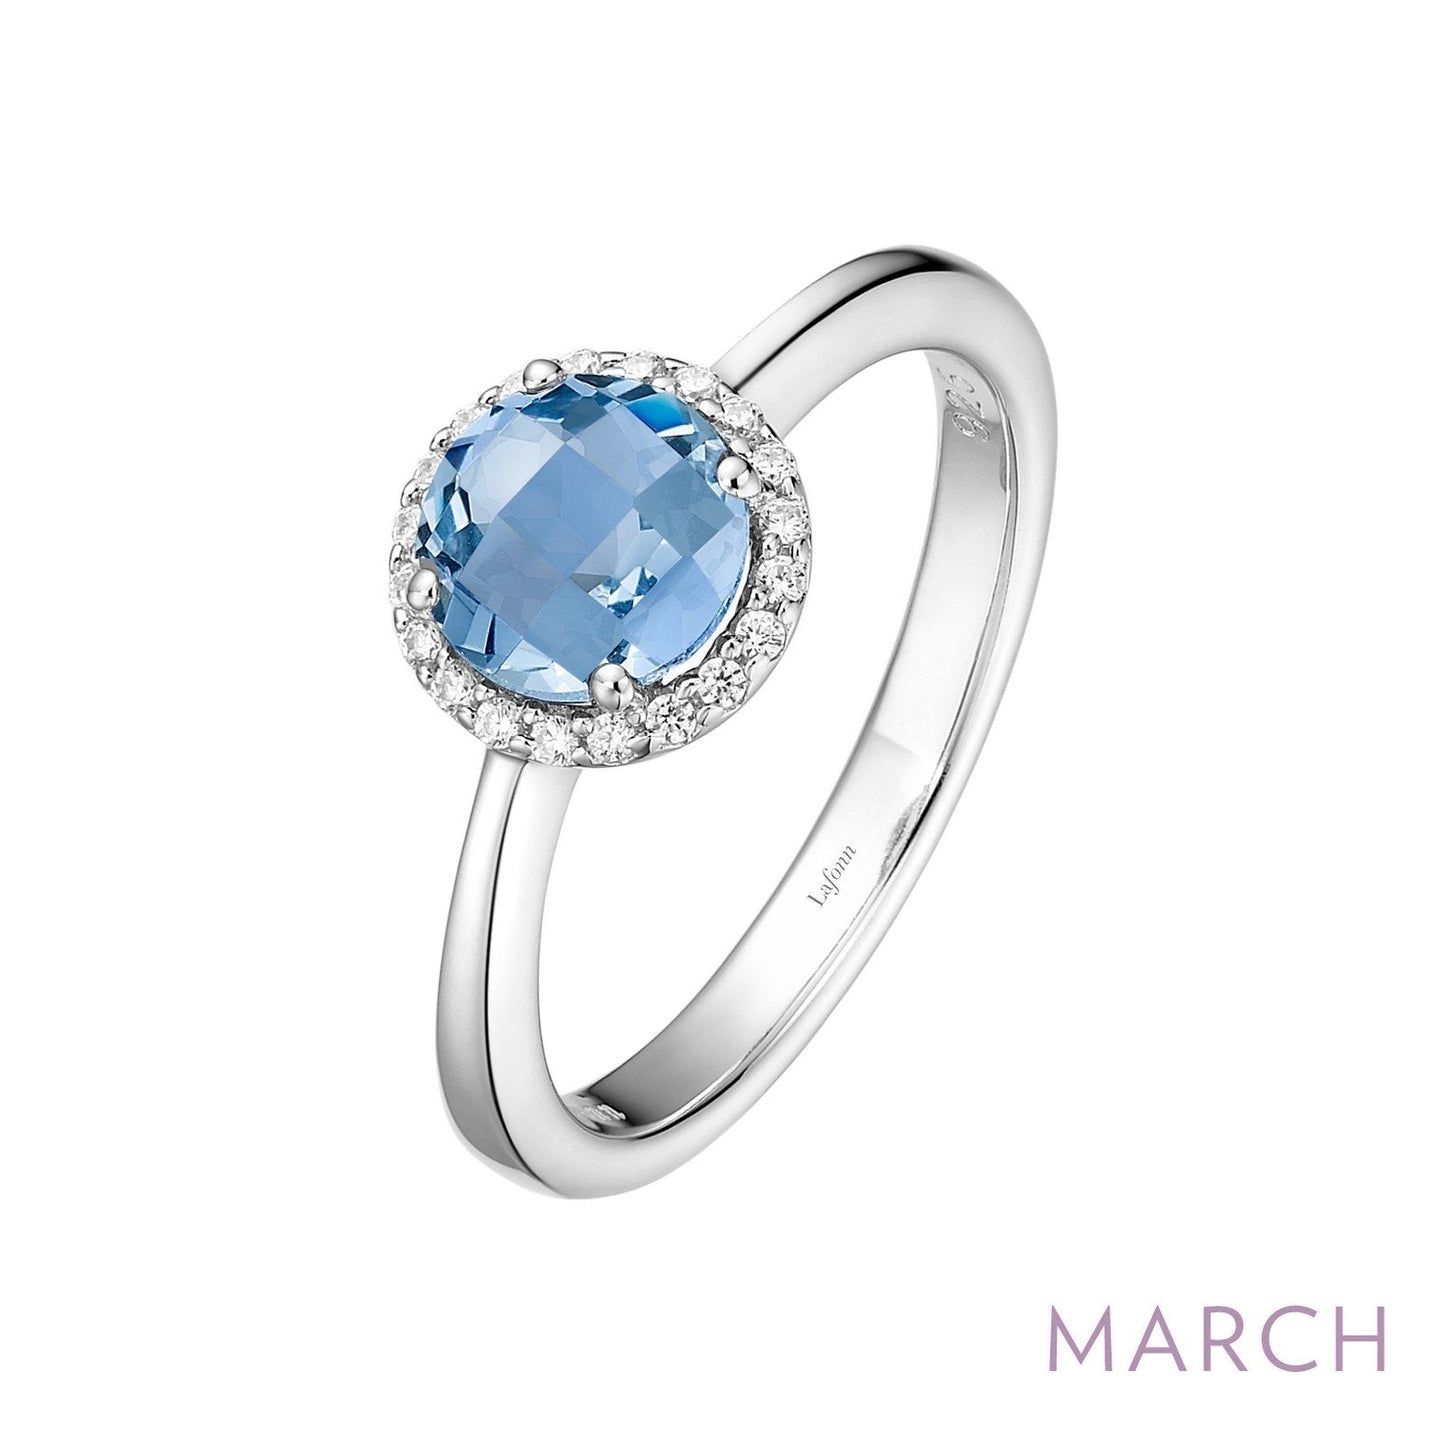 Lafonn March Birthstone Ring MARCH RINGS Size 5 Platinum 1.05 cts CTS 